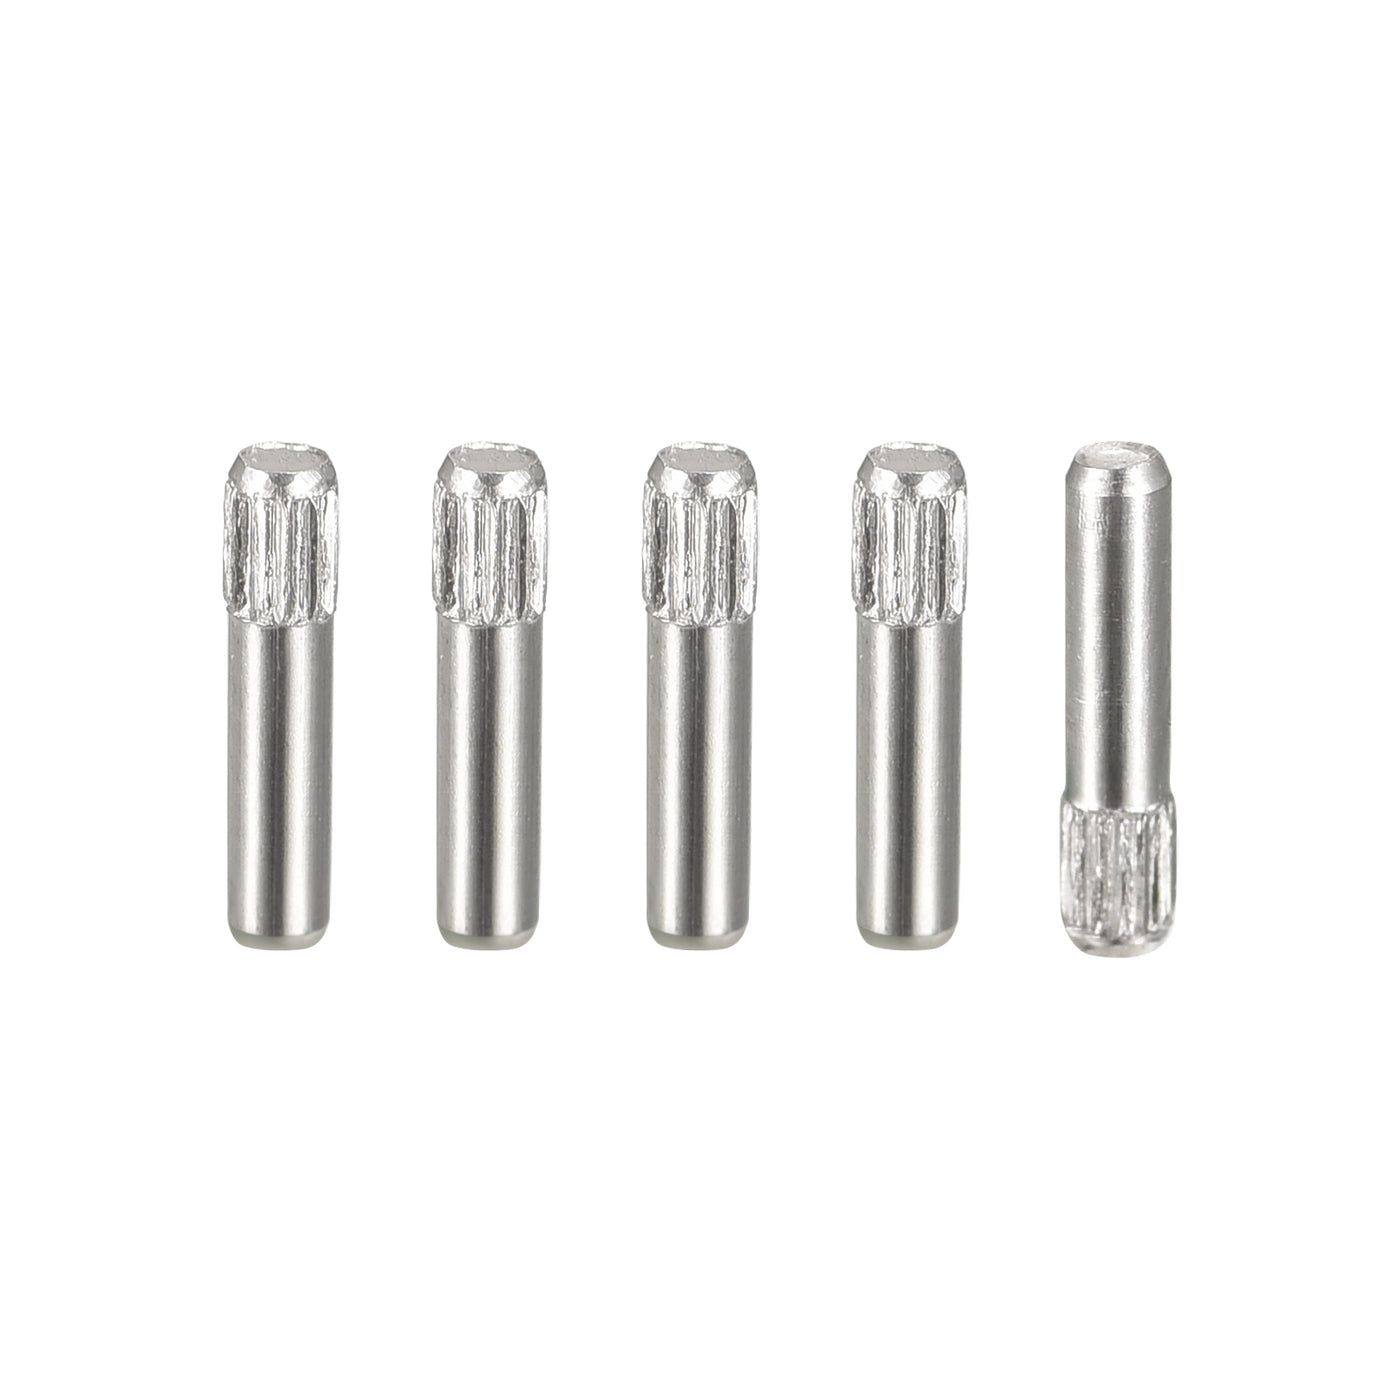 uxcell Uxcell 2x10mm 304 Stainless Steel Dowel Pins, 5Pcs Knurled Head Flat End Dowel Pin